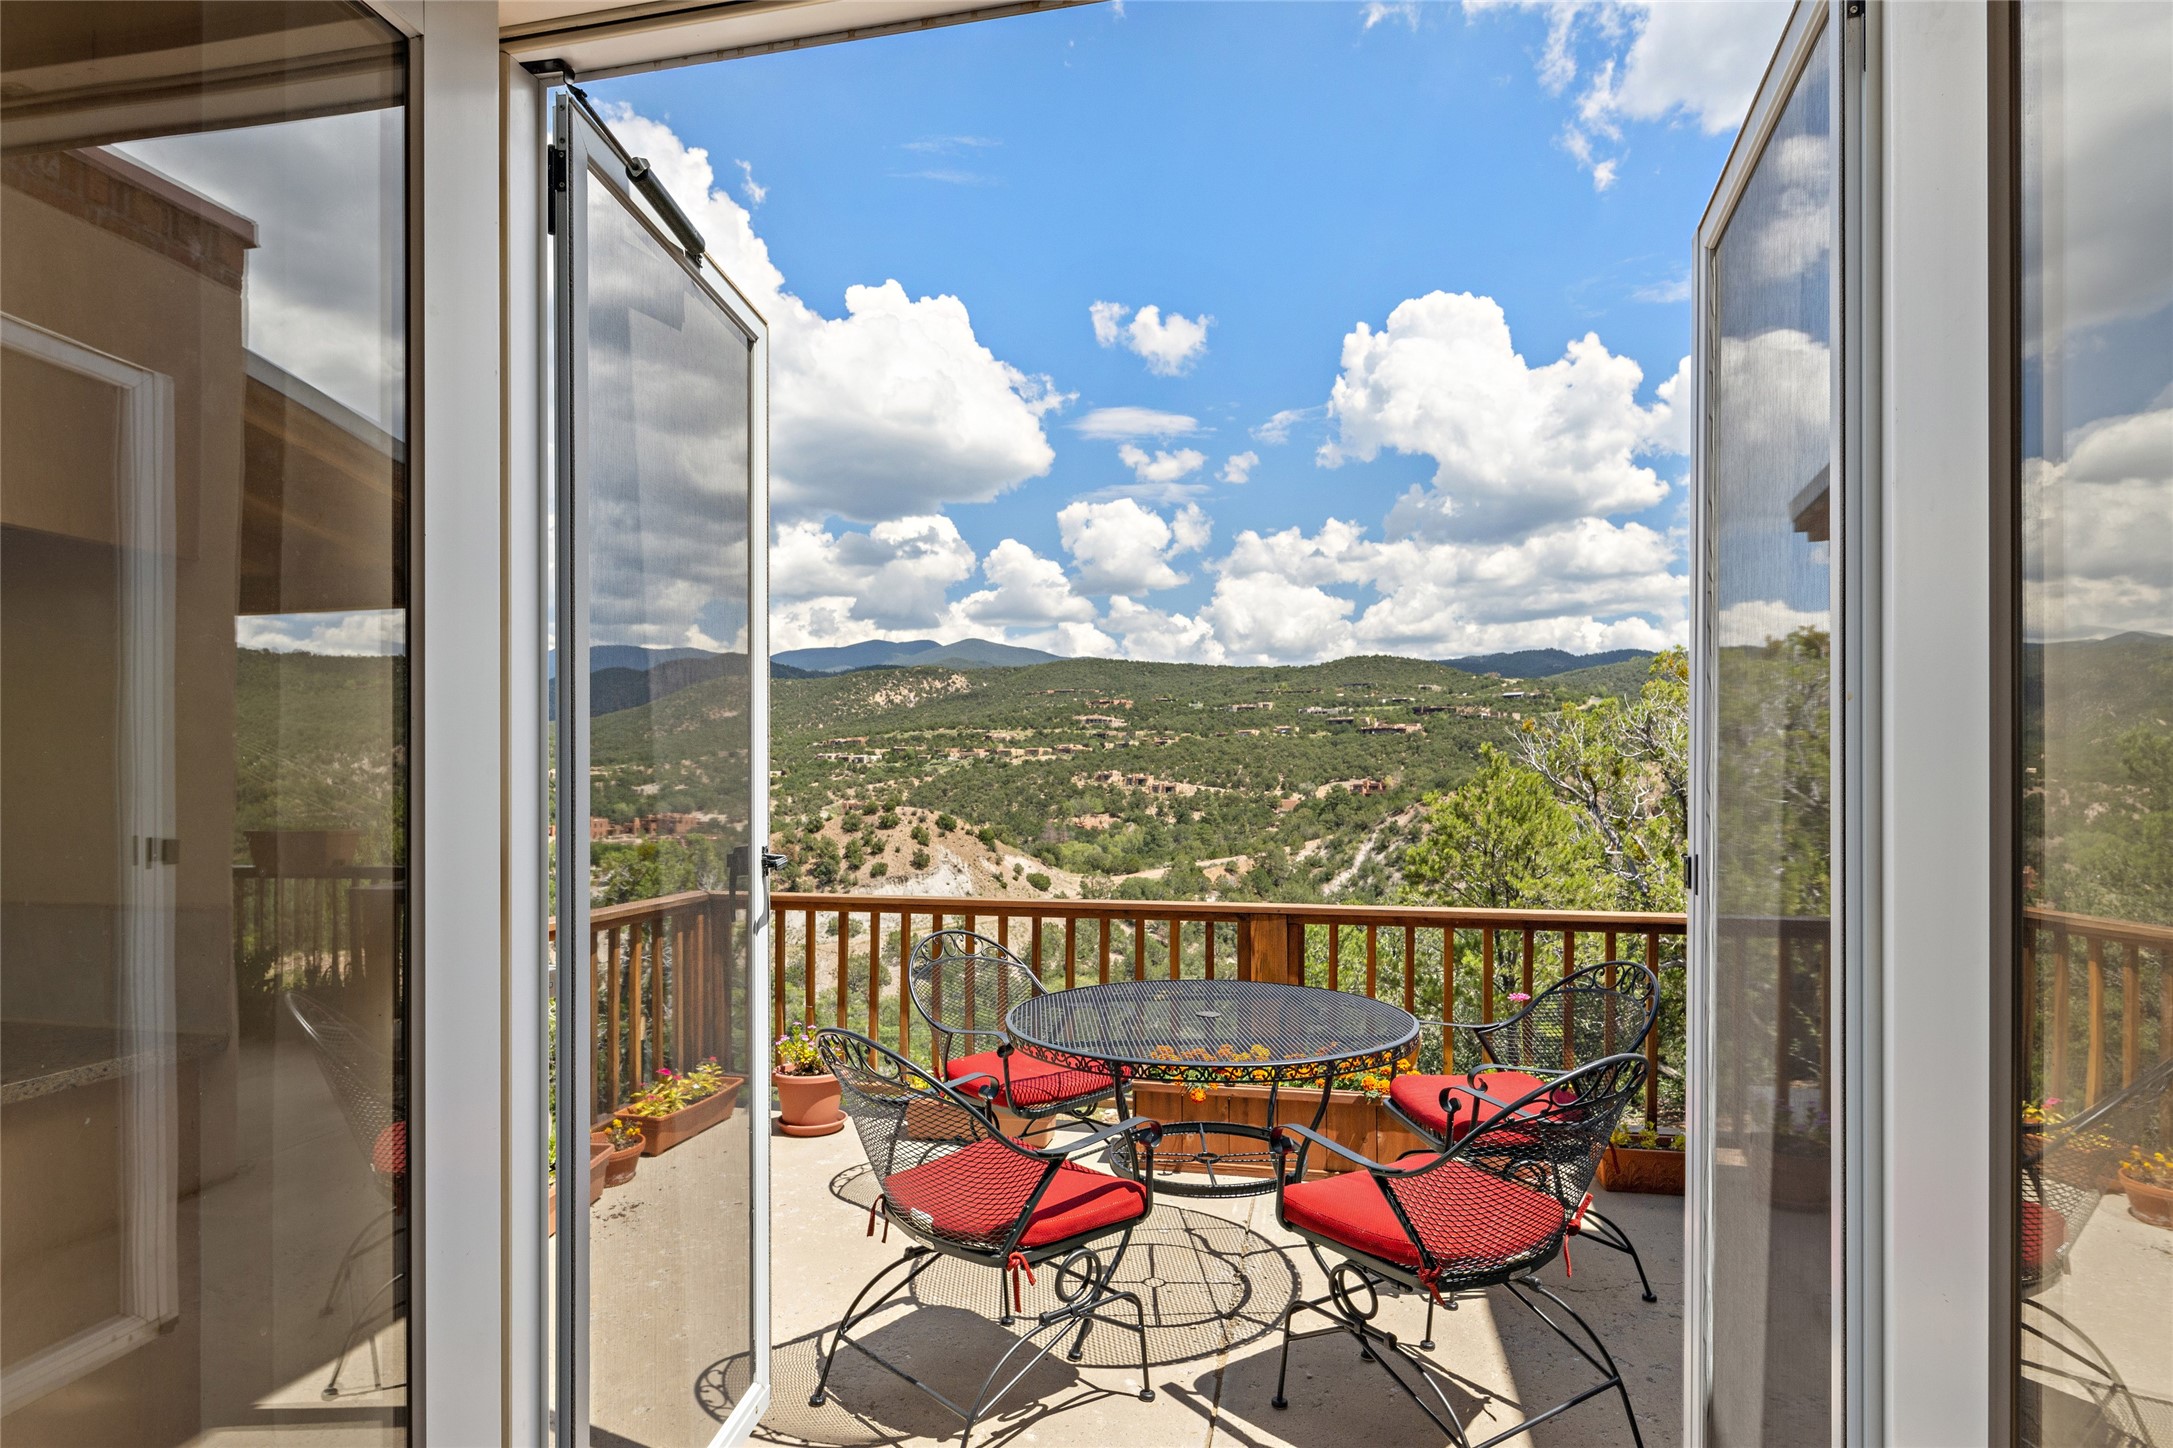 Al fresco dining deck off Kitchen with view of Tesuque and Santa Fe ski basin